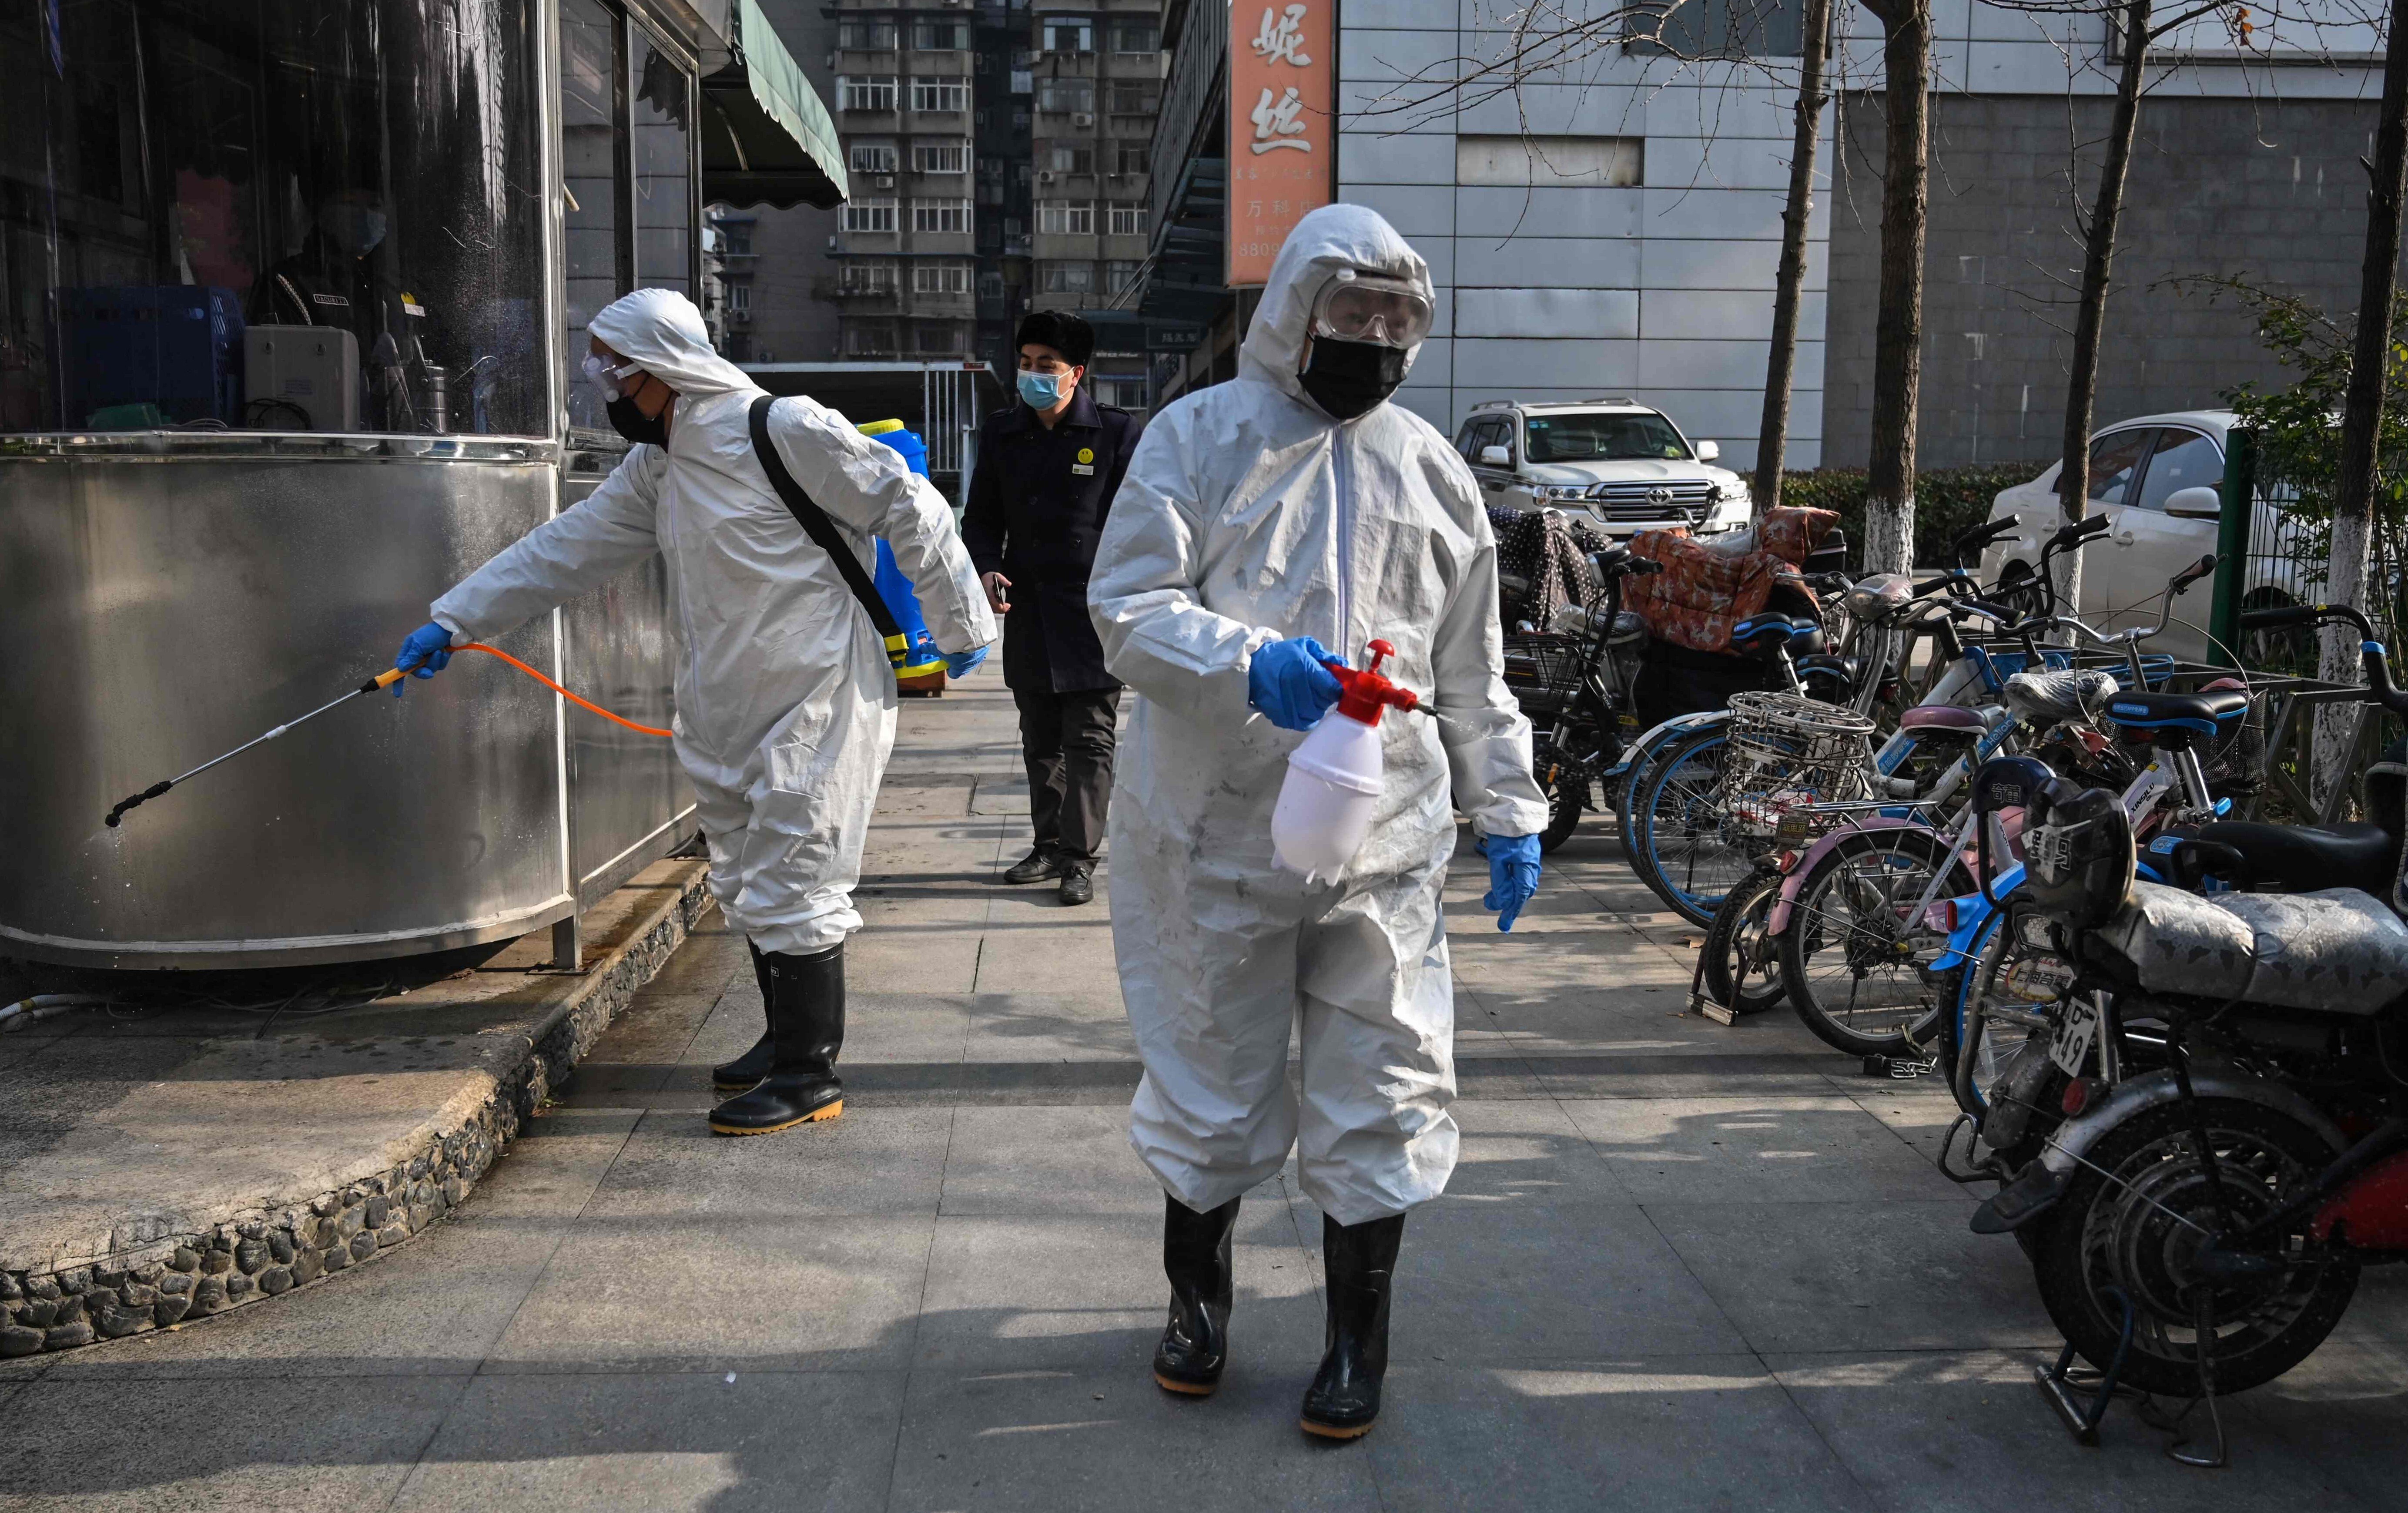 People dressed in protective clothes disinfect an area in Wuhan, in China’s Hubei province, on January 29, 2020. A WHO team recently visited the city, where the first Covid-19 cases were detected, as part of a probe into the origins of Covid-19. Photo: AFP